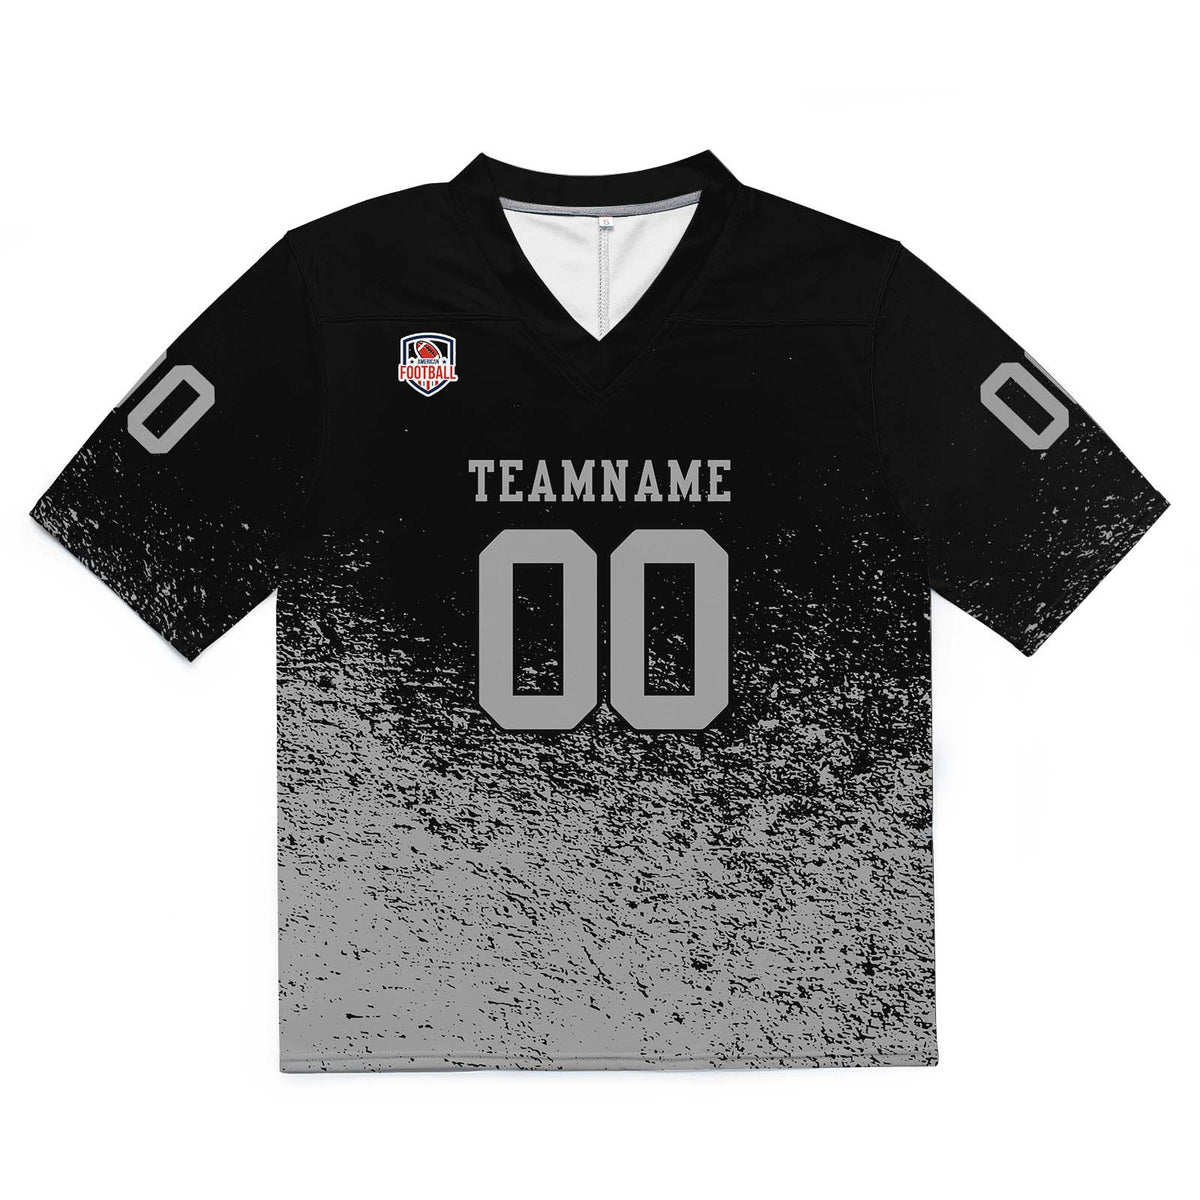 Custom Football Jersey Shirt Personalized Stitched Printed Team Name Number Black & Gray